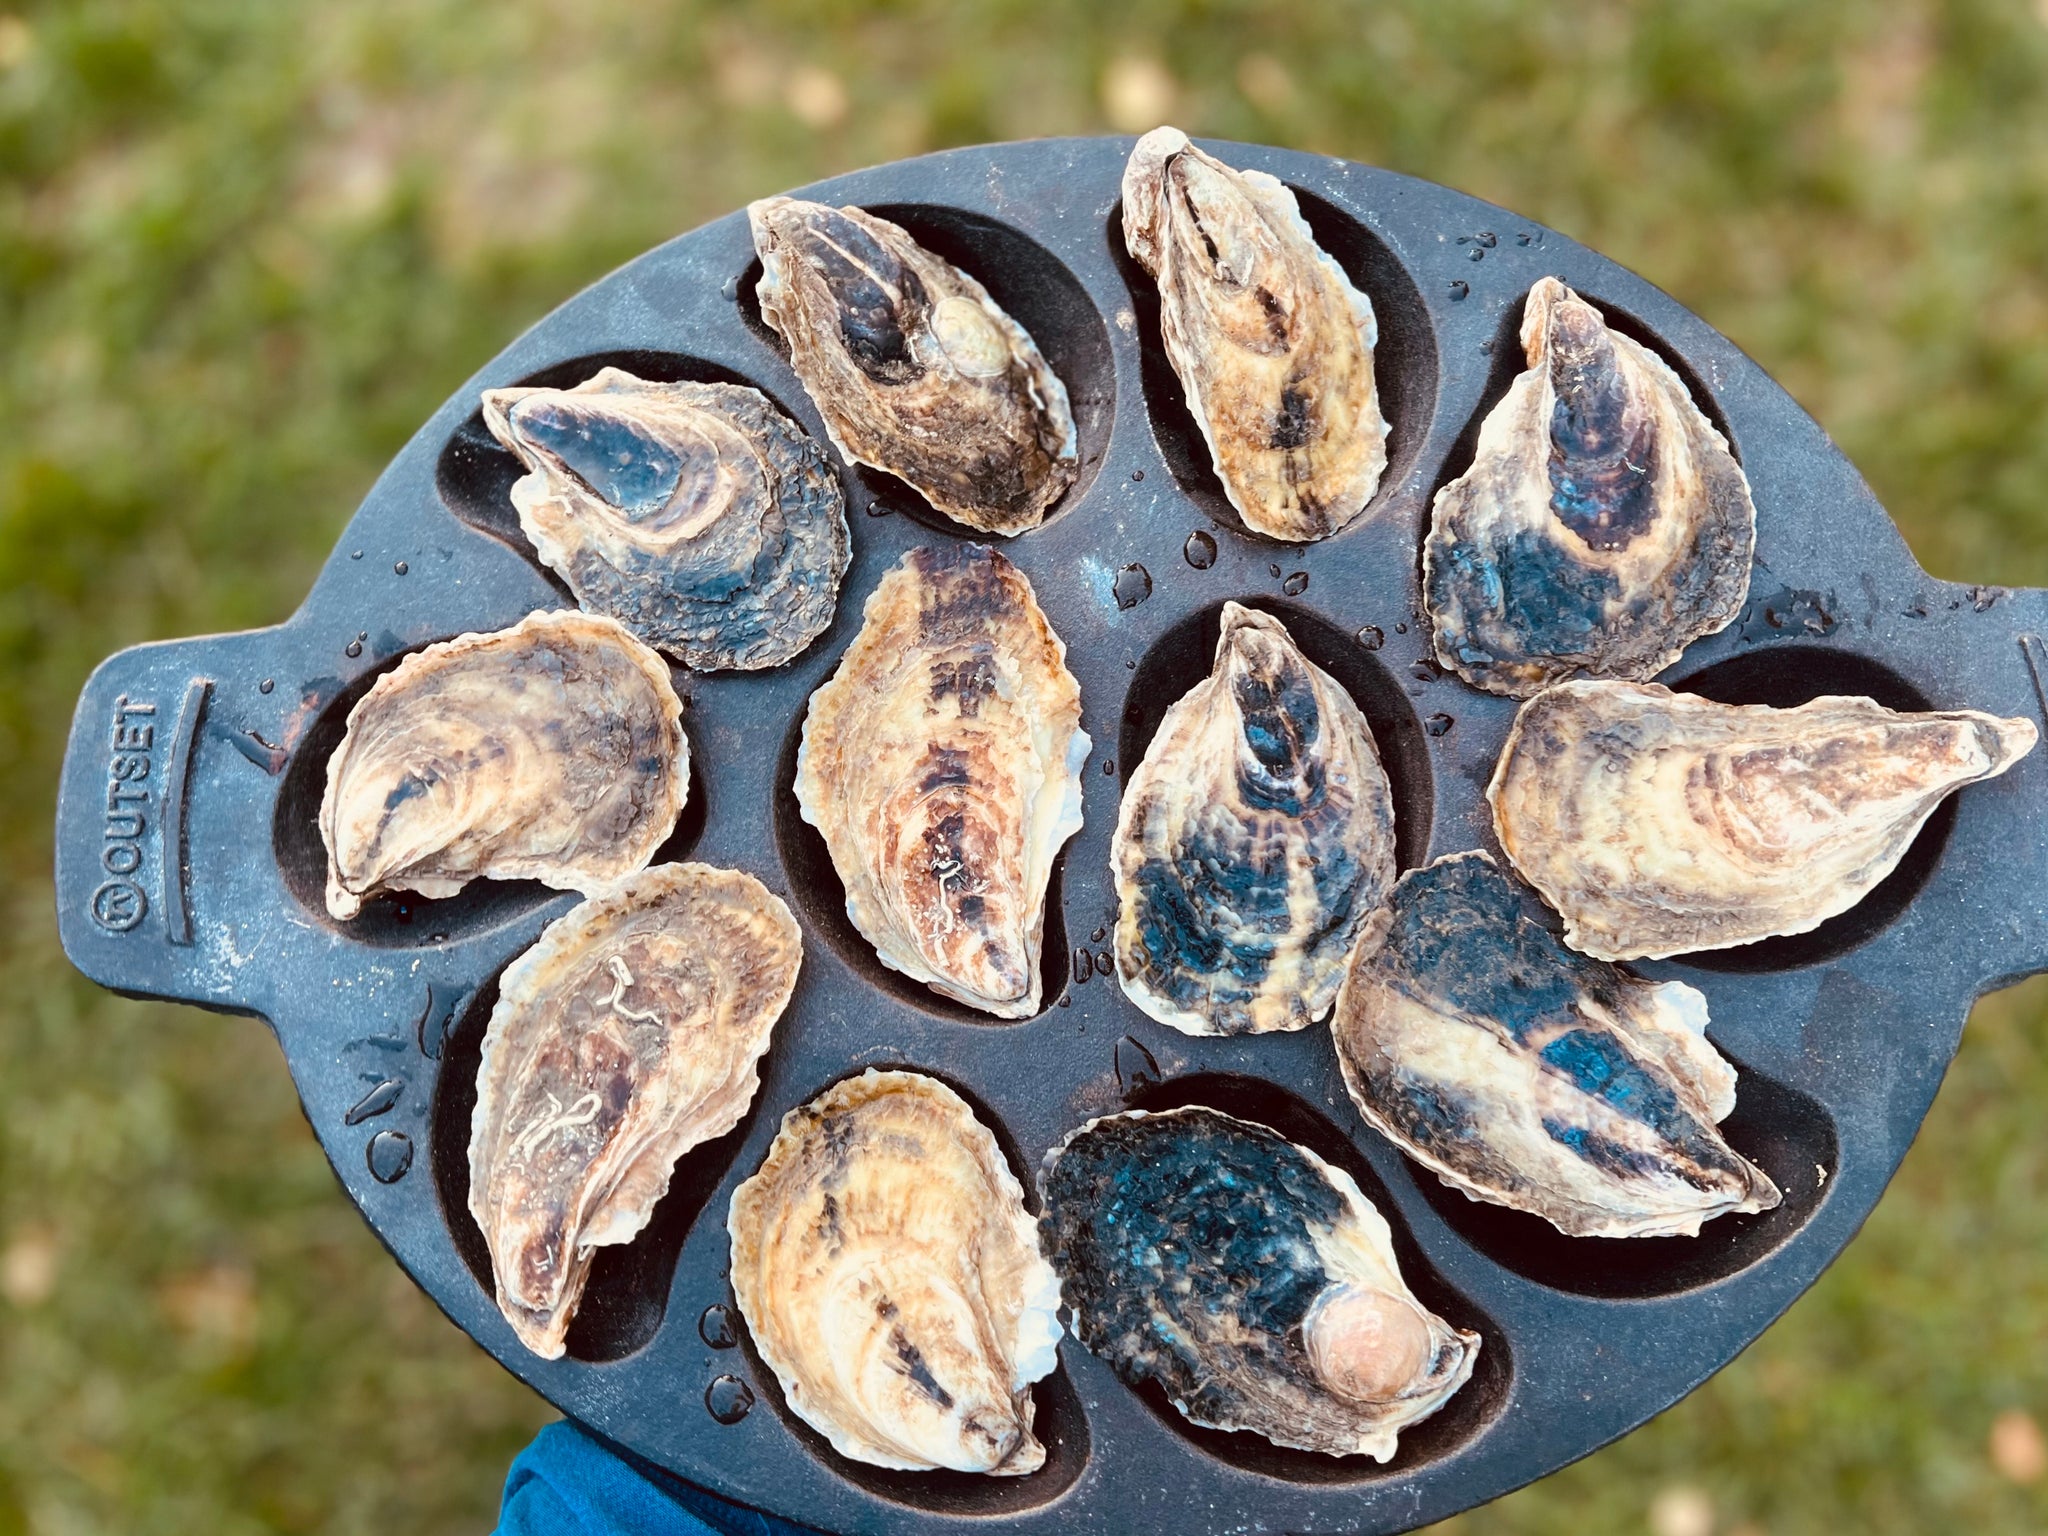 100 Count Bag of Local NJ Oysters – Barnegat Oyster Collective